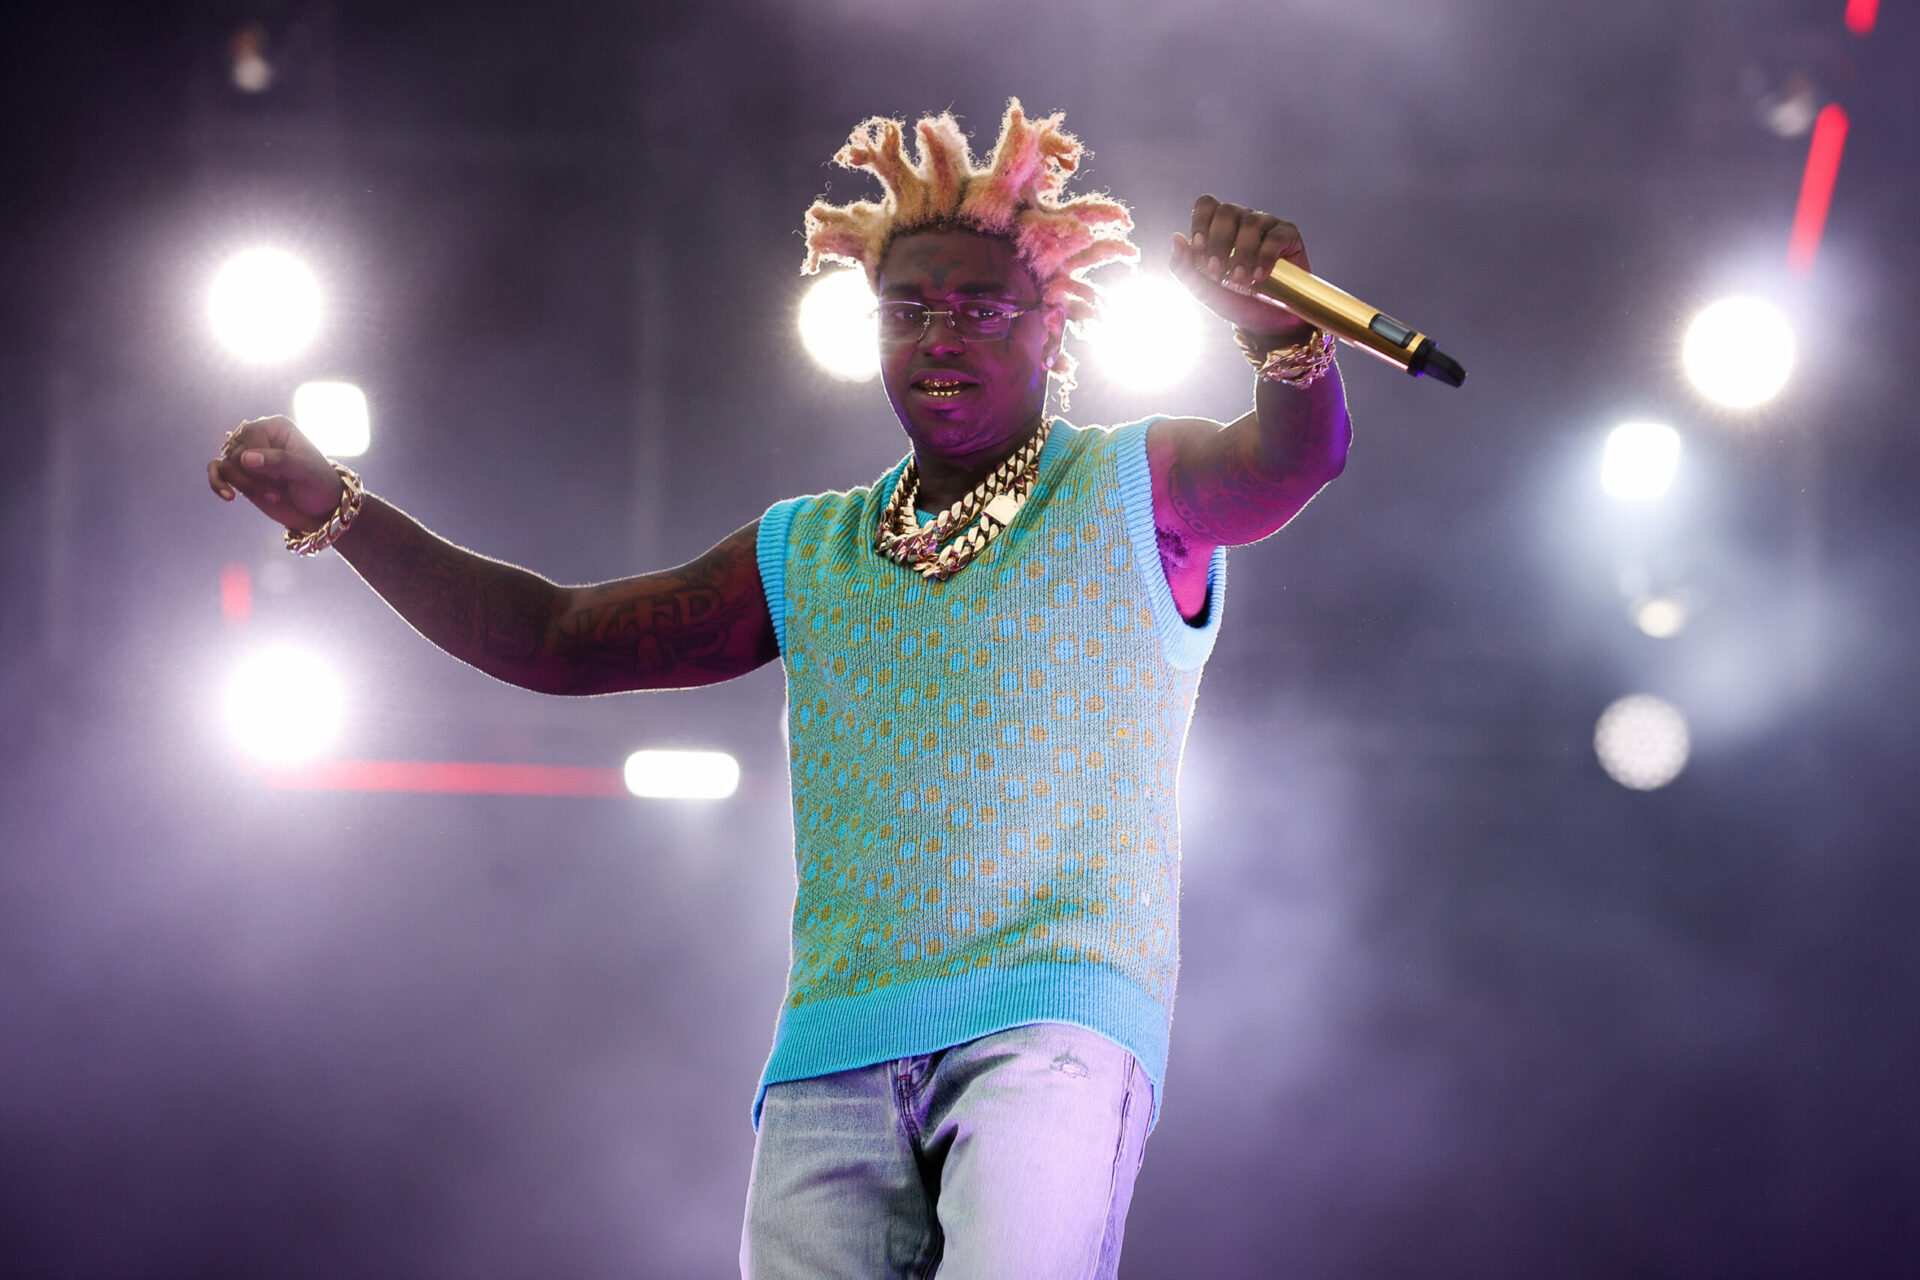 Kodak Black won’t be home for Christmas. Judge says he is a ‘danger to the community’